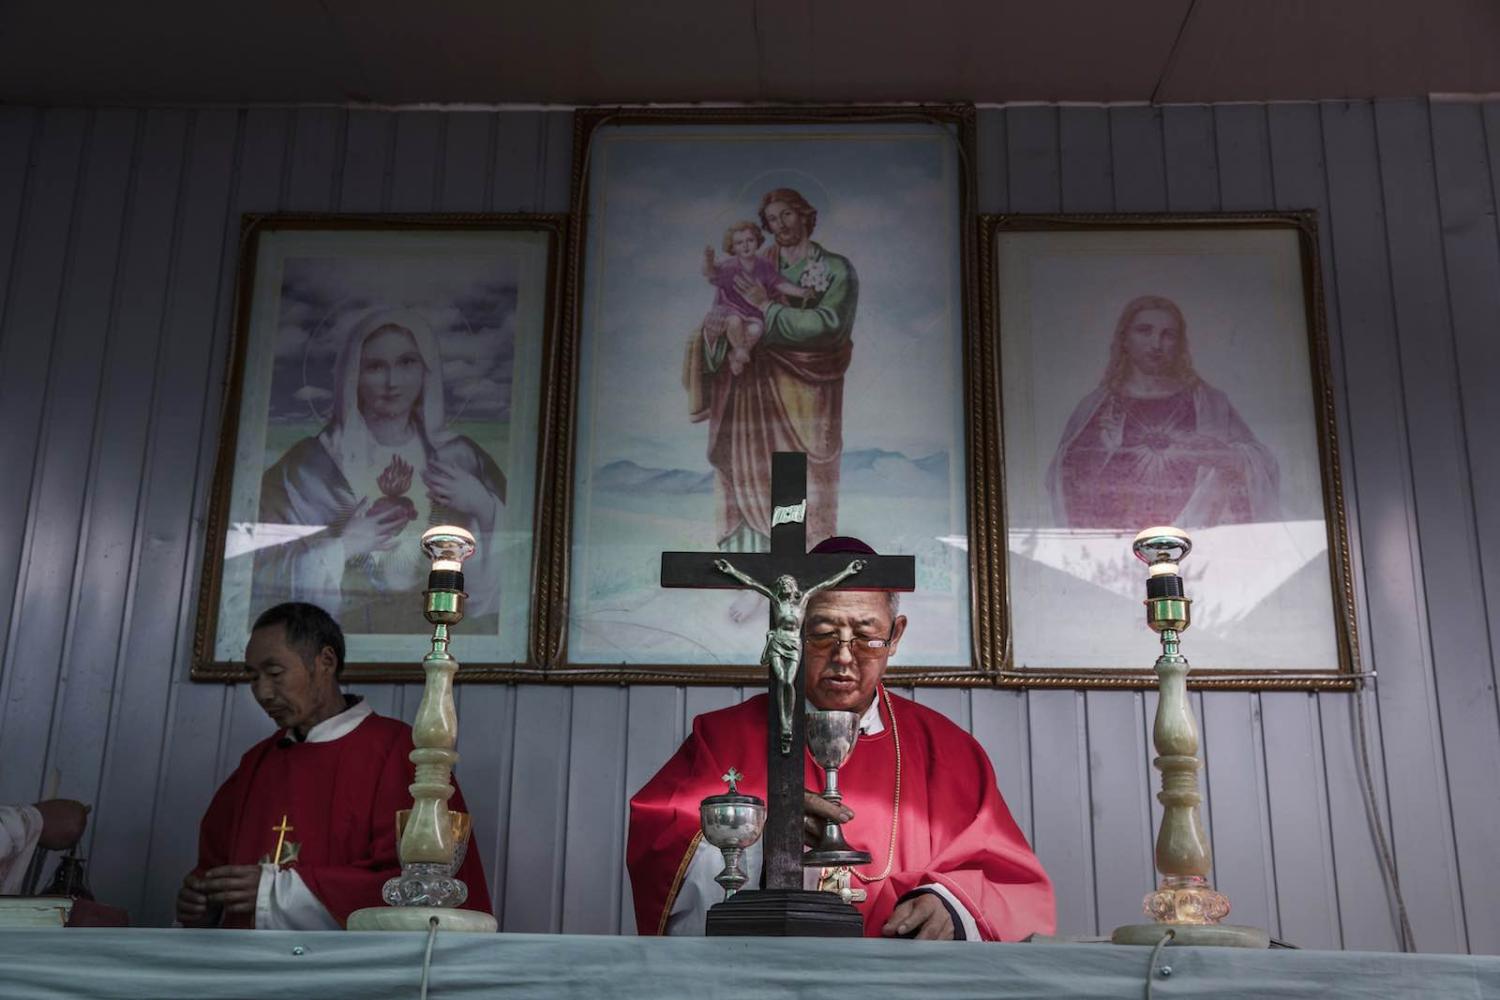 A priest leads mass during the Easter Holy Week at an “underground” church near Shijiazhuang, Hebei Province, China, April 2017 (Photo: Kevin Frayer/Getty Images)